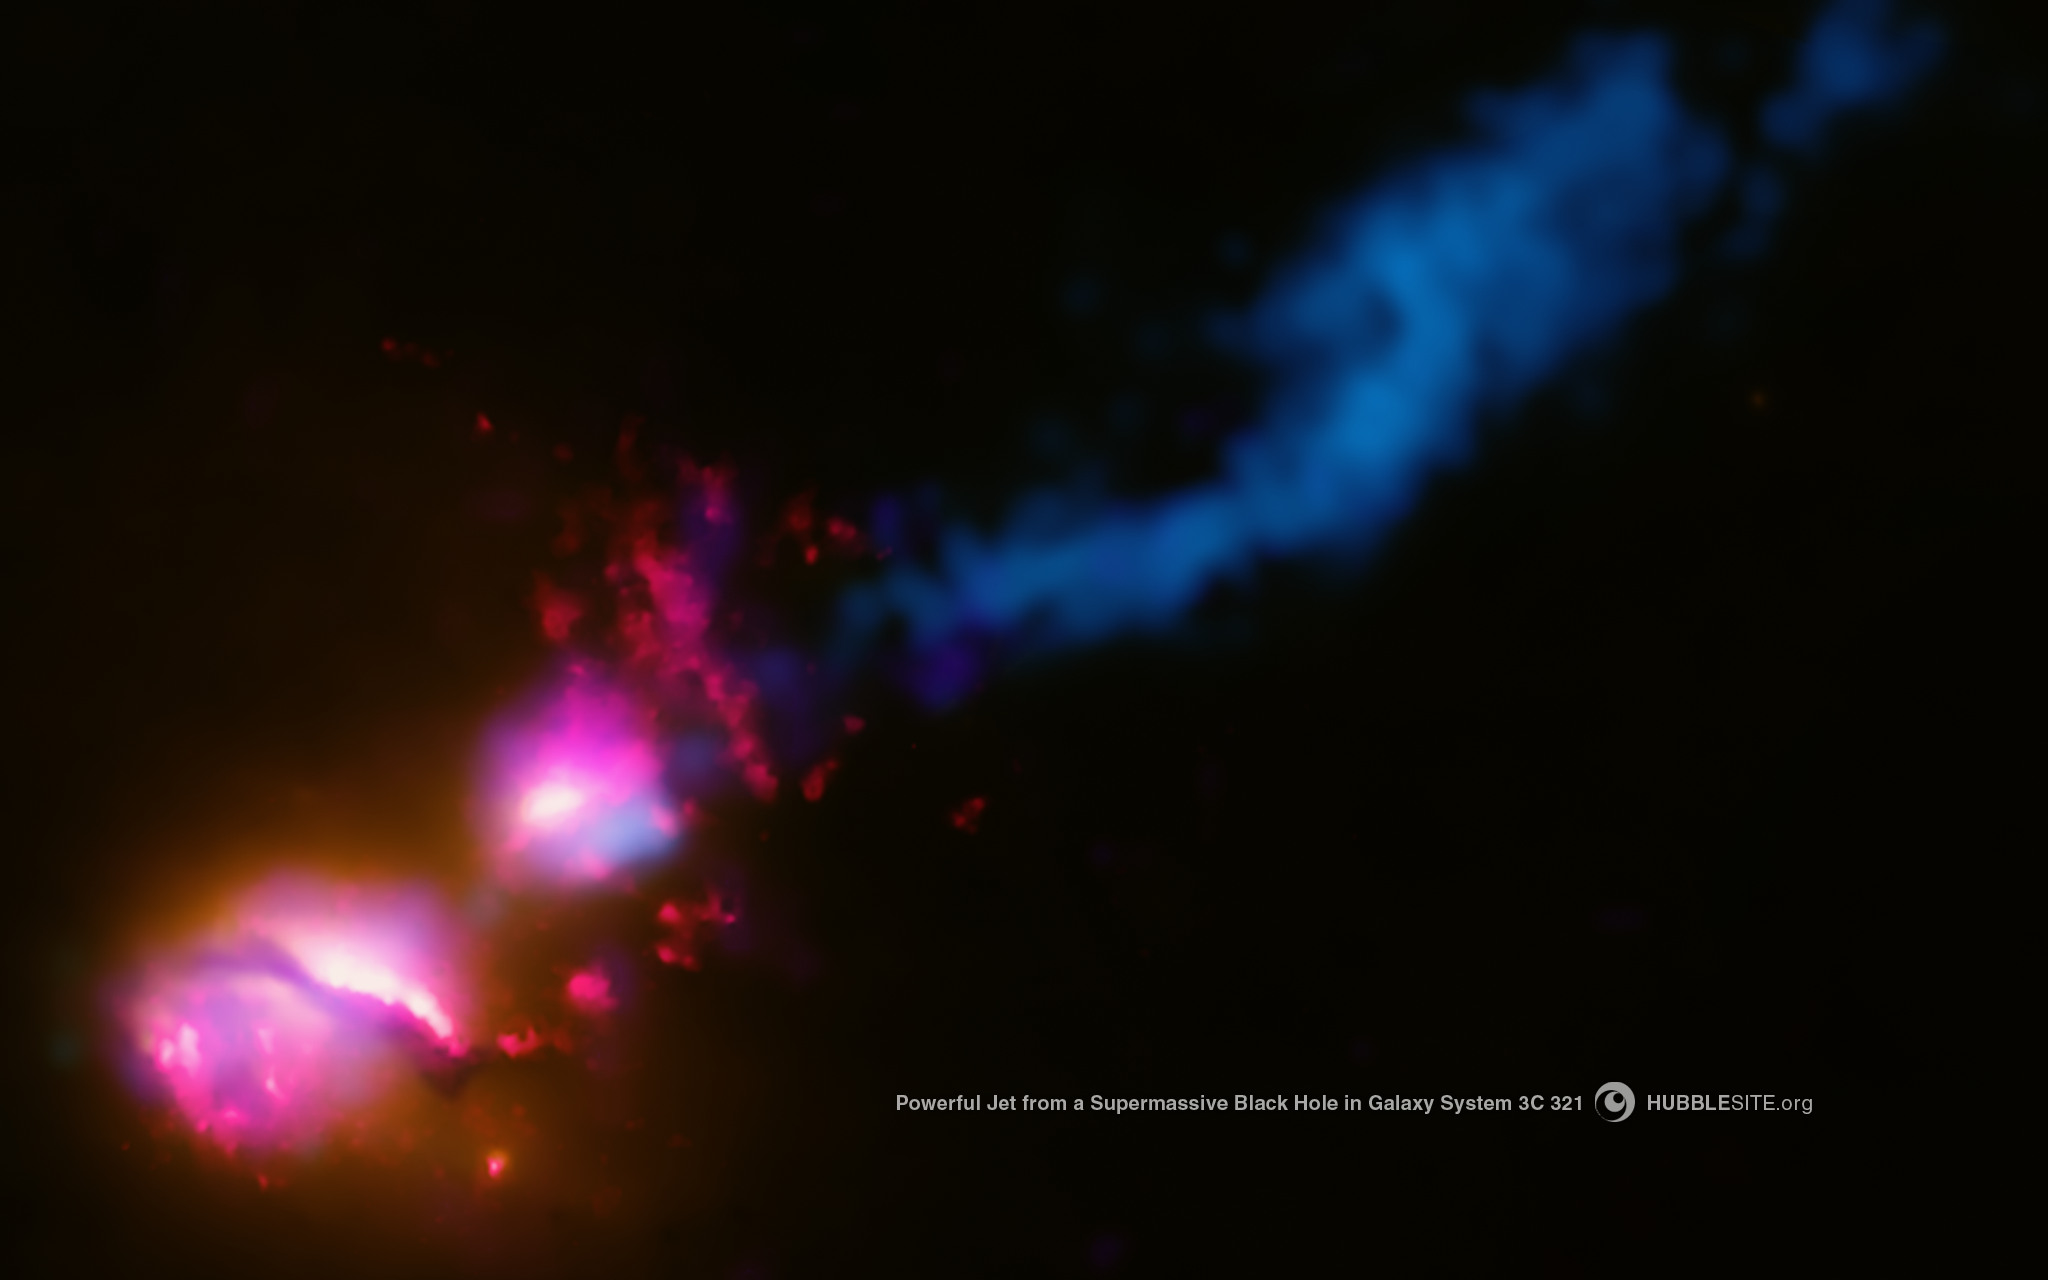 Powerful Jet from a Supermassive Black Hole in Galaxy System 3C 321